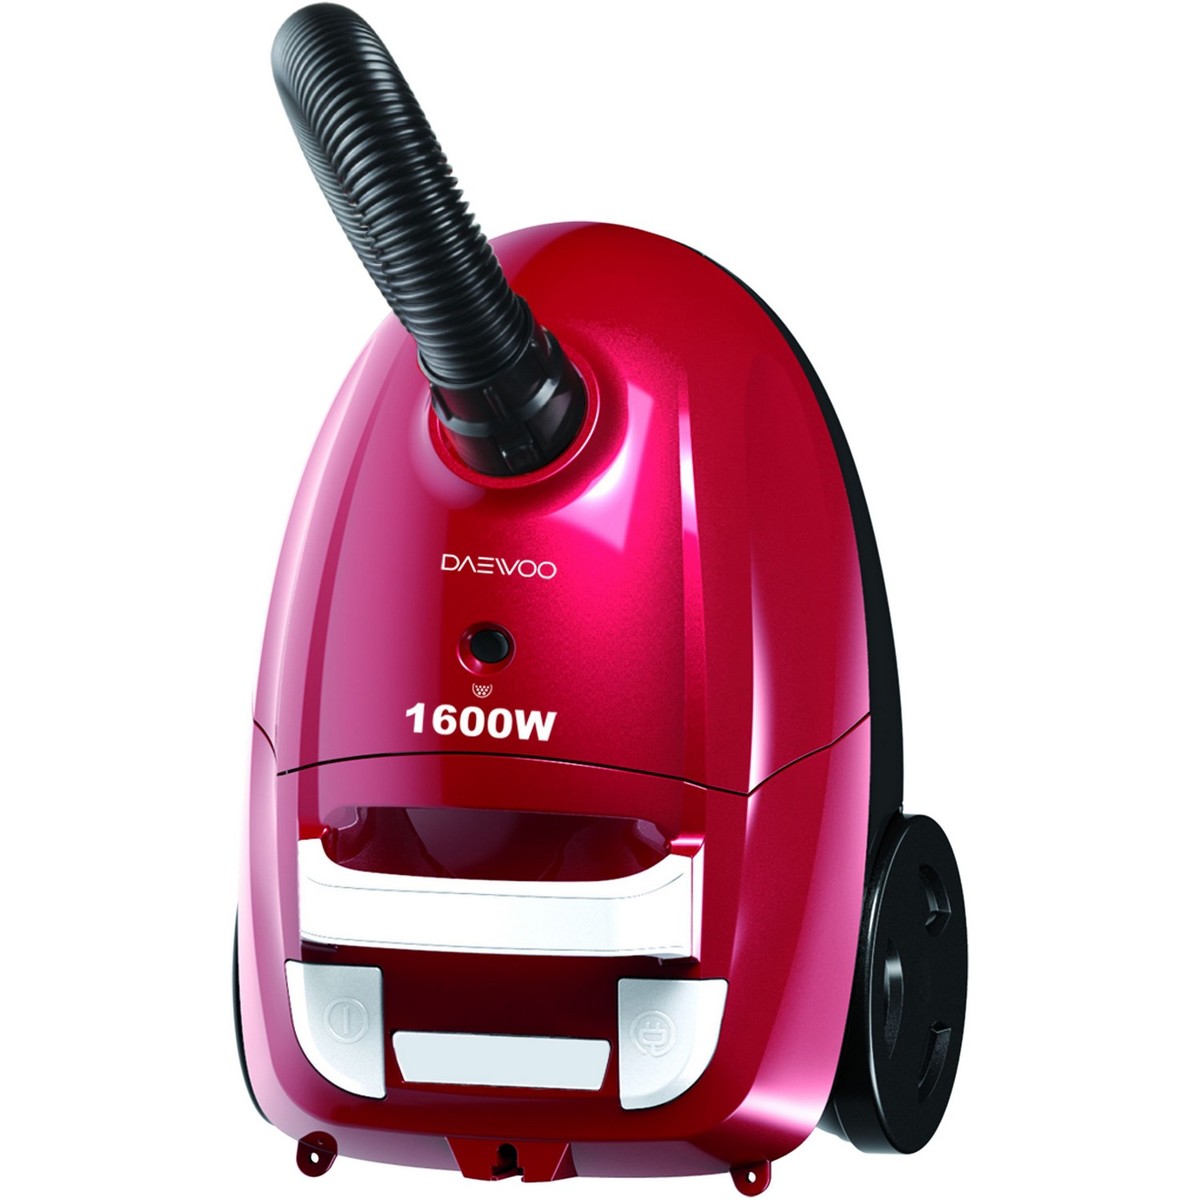 Daewoo Vacuum Cleaner RGJ-220R 1600W Online at Best Price | Canister ...